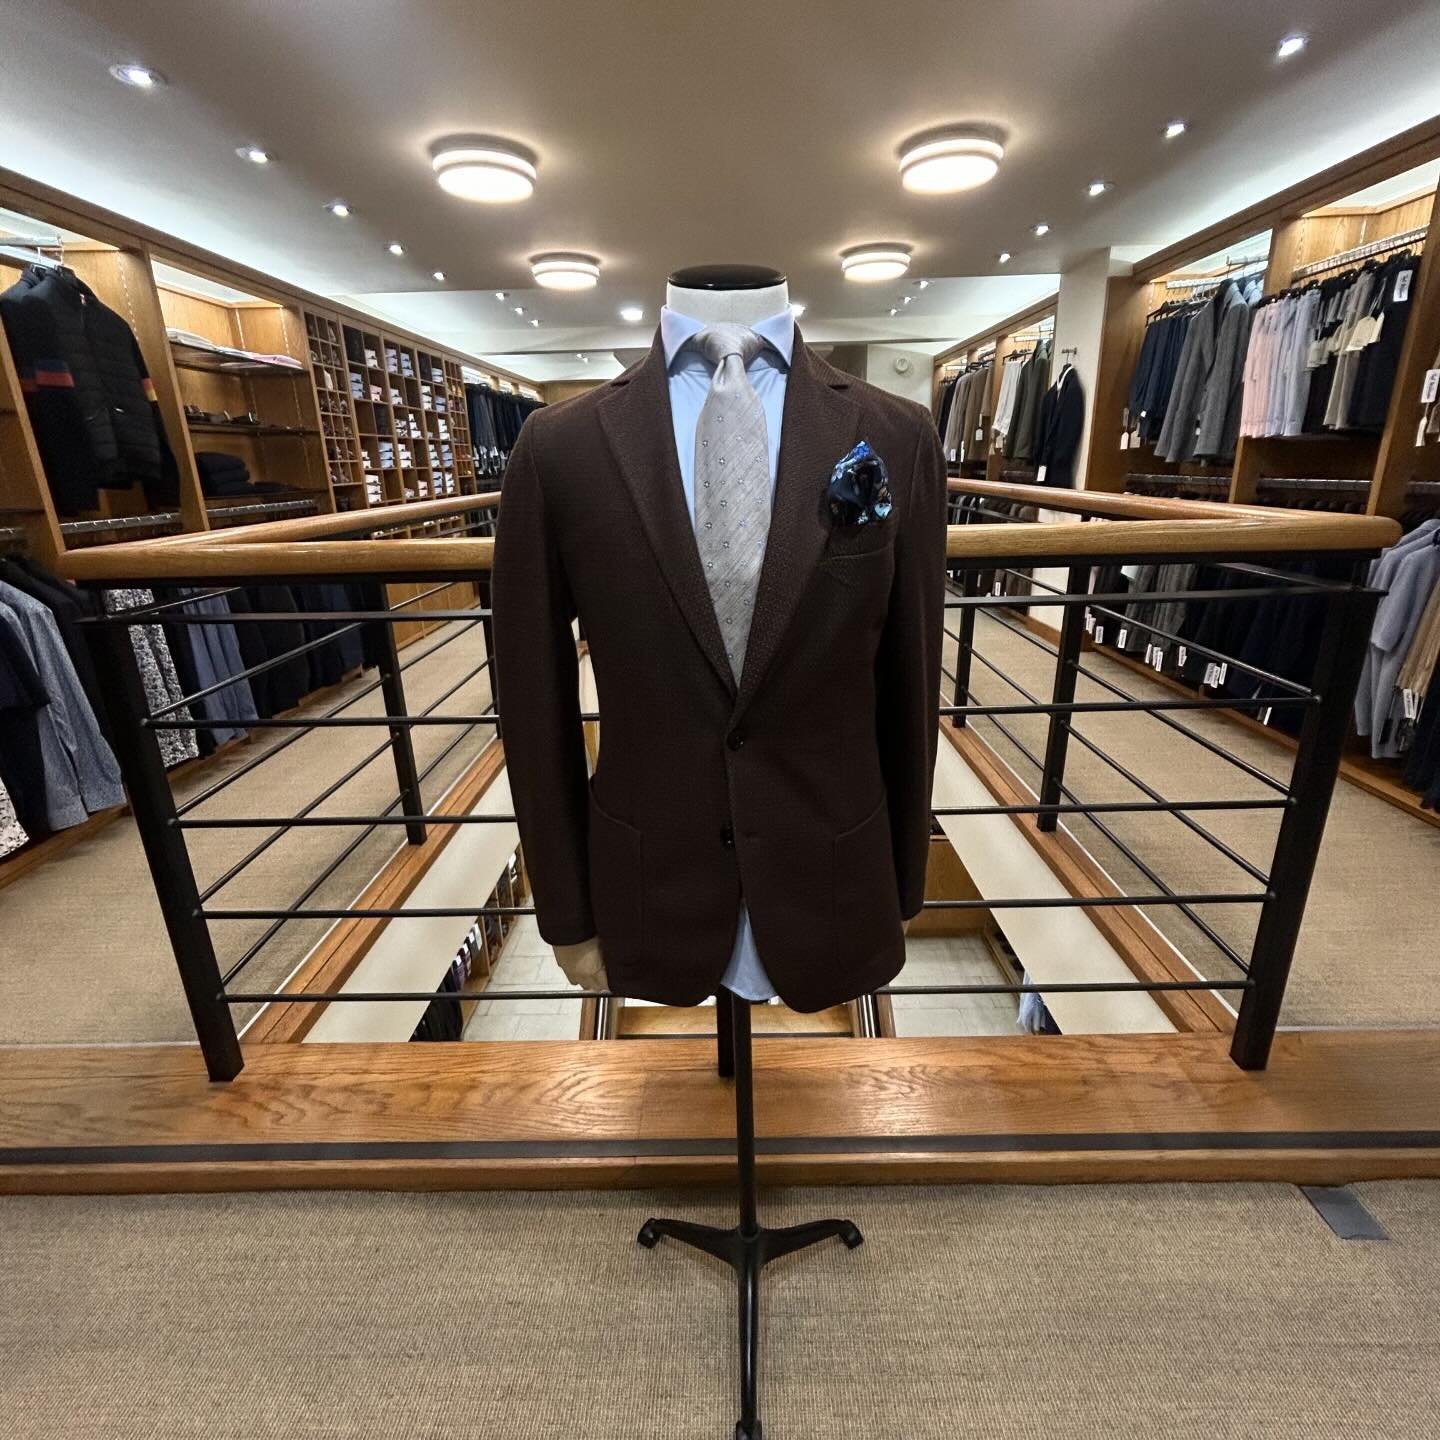 We are fully stocked upstairs for your tailoring needs, including this beautiful piece from Circolo with Eton accessories. 

#circolo1901 #circolojacket #circolo #tailoredjacket #briglia1949 #brigliatrousers #paulsmith #remusuomo #etonshirts #support